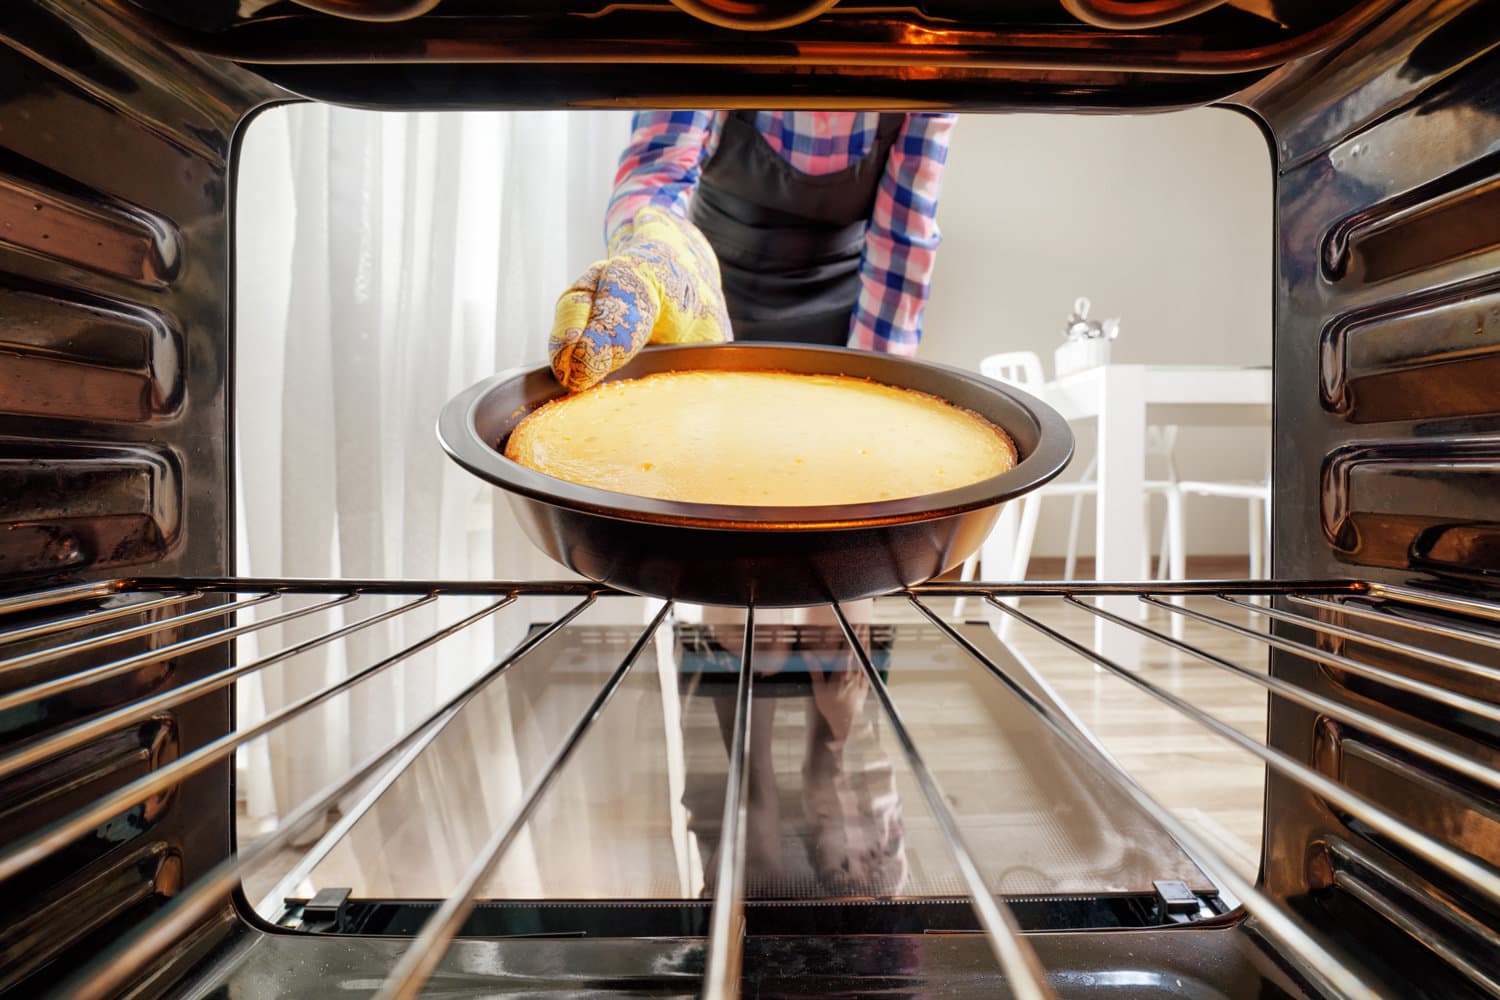 Housewife taking cheesecake out of oven in kitchen. View from inside of the oven. Woman wearing black apron and colorful oven mitt. 